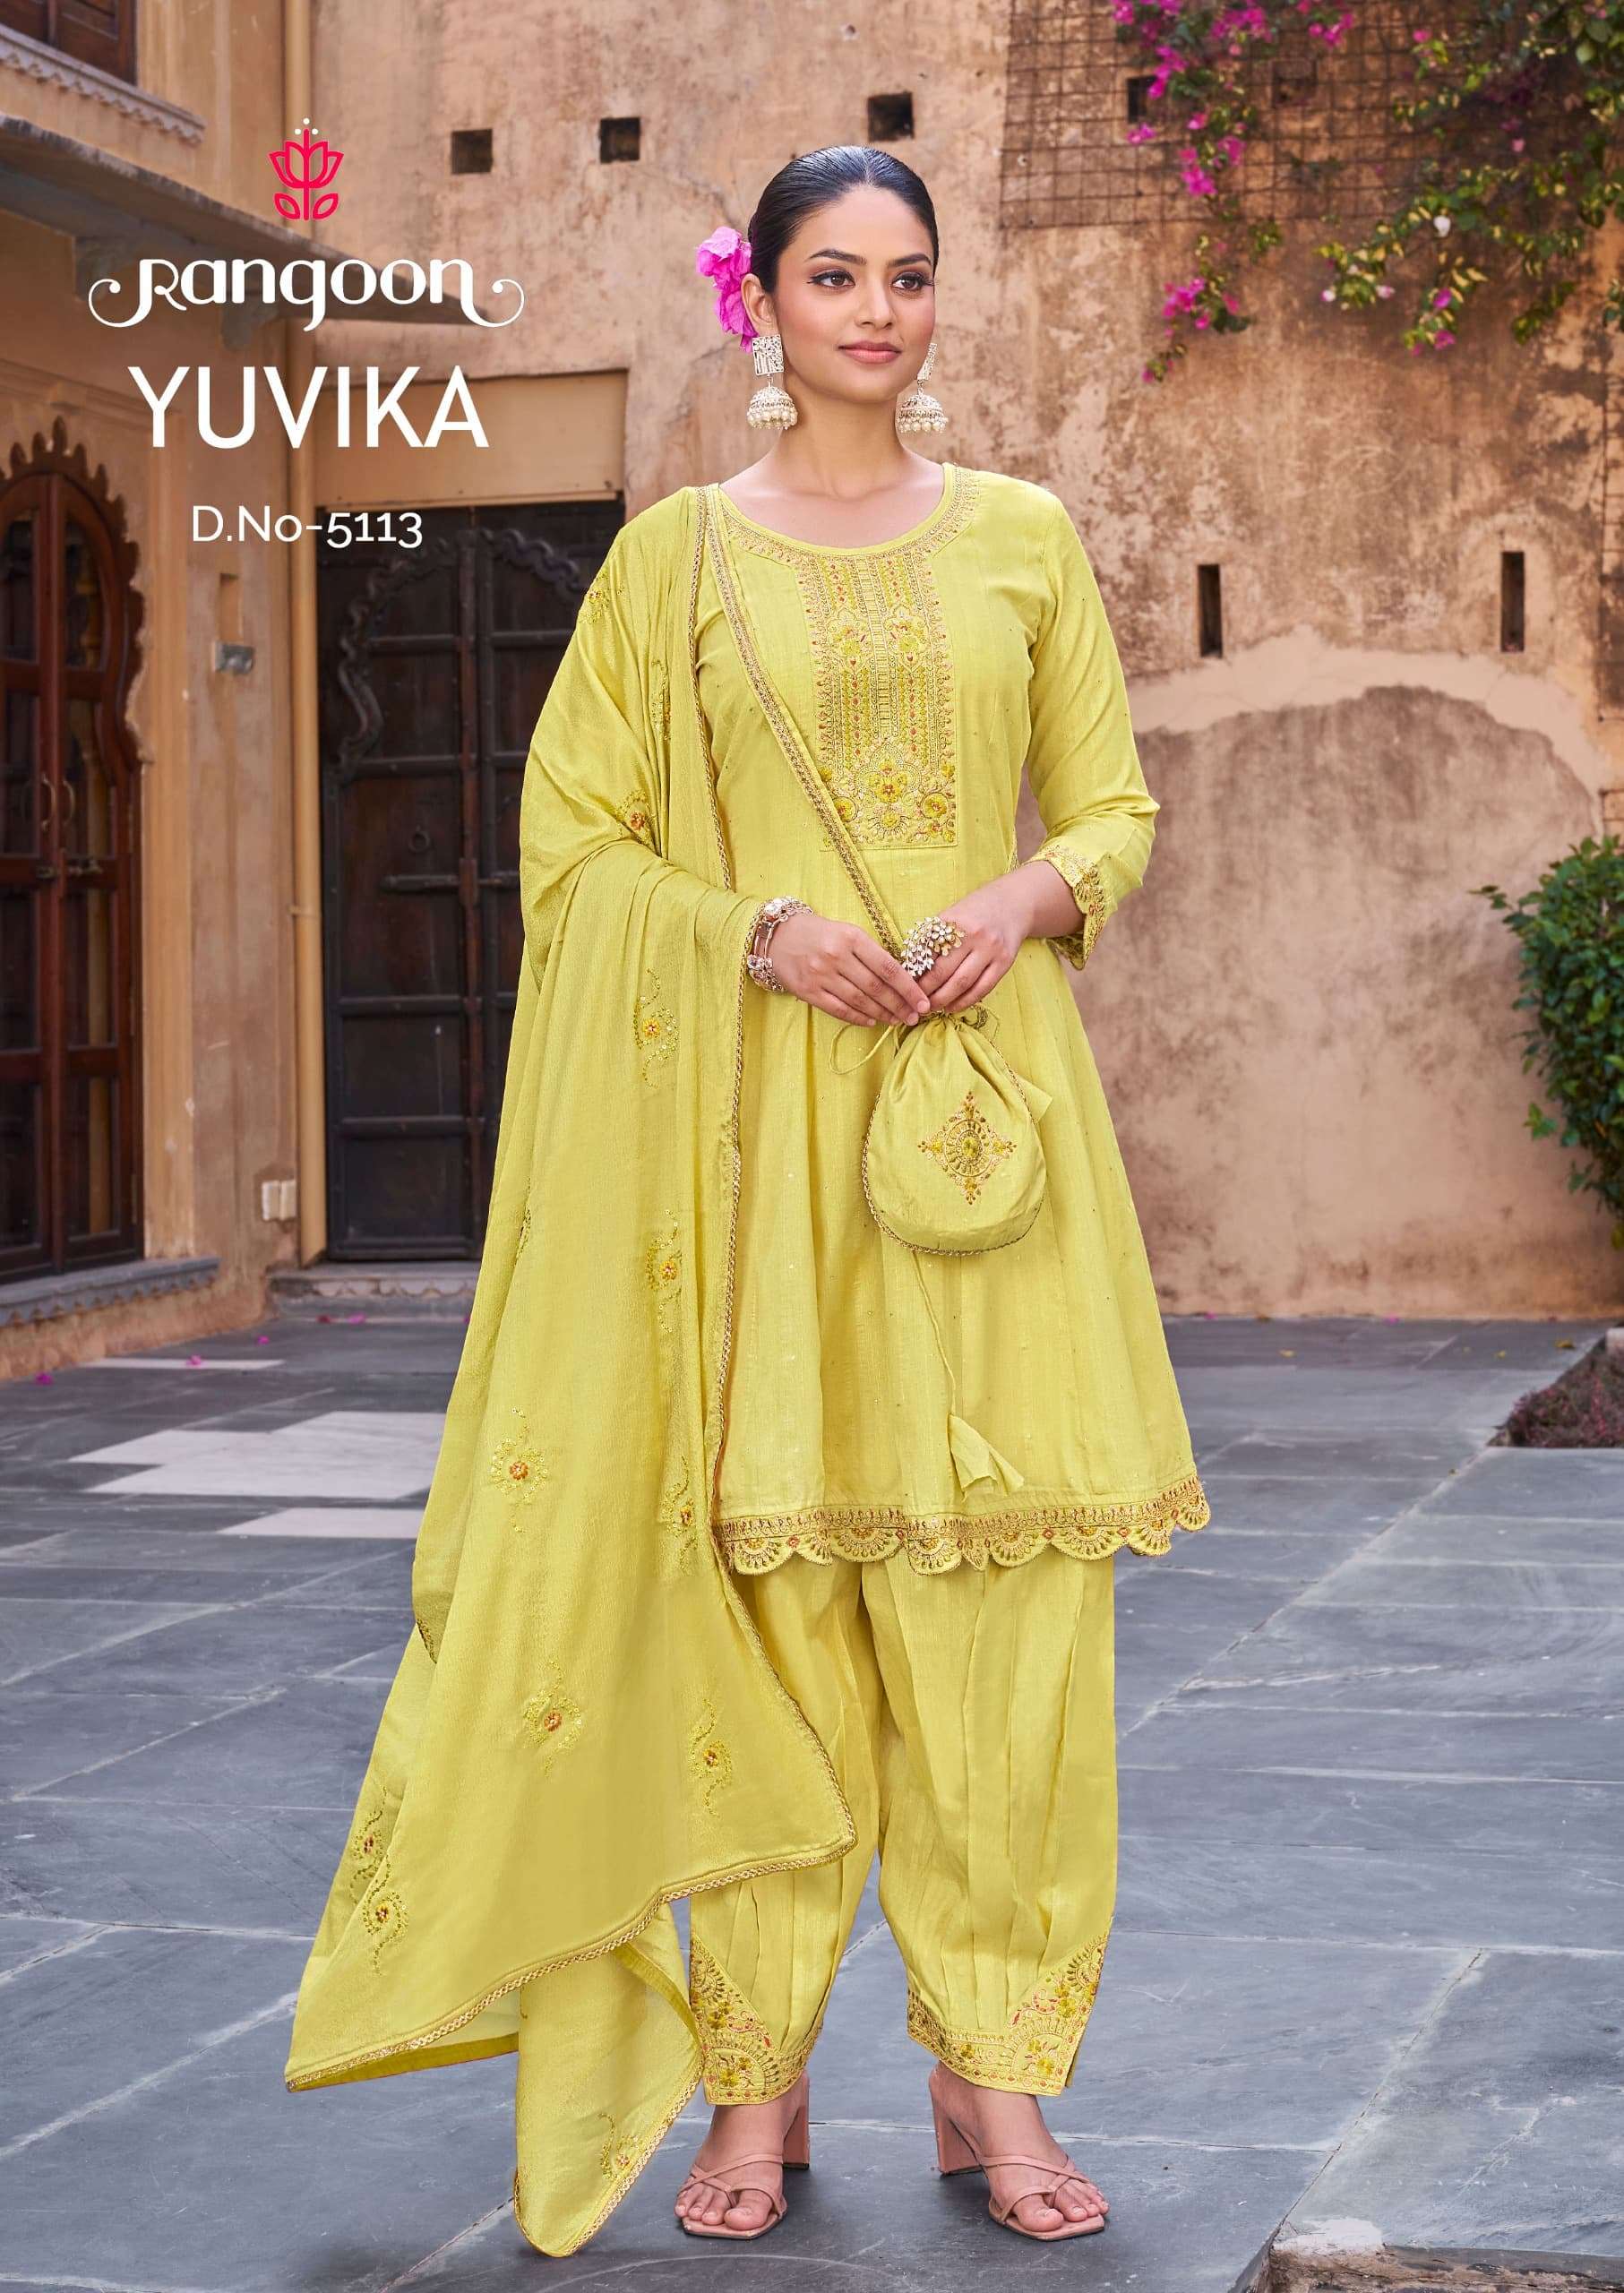 yuvika by rangoon 5111-5116 series exclusive designer kurti with afghani style pant with dupatta latest collection surat gujarat 